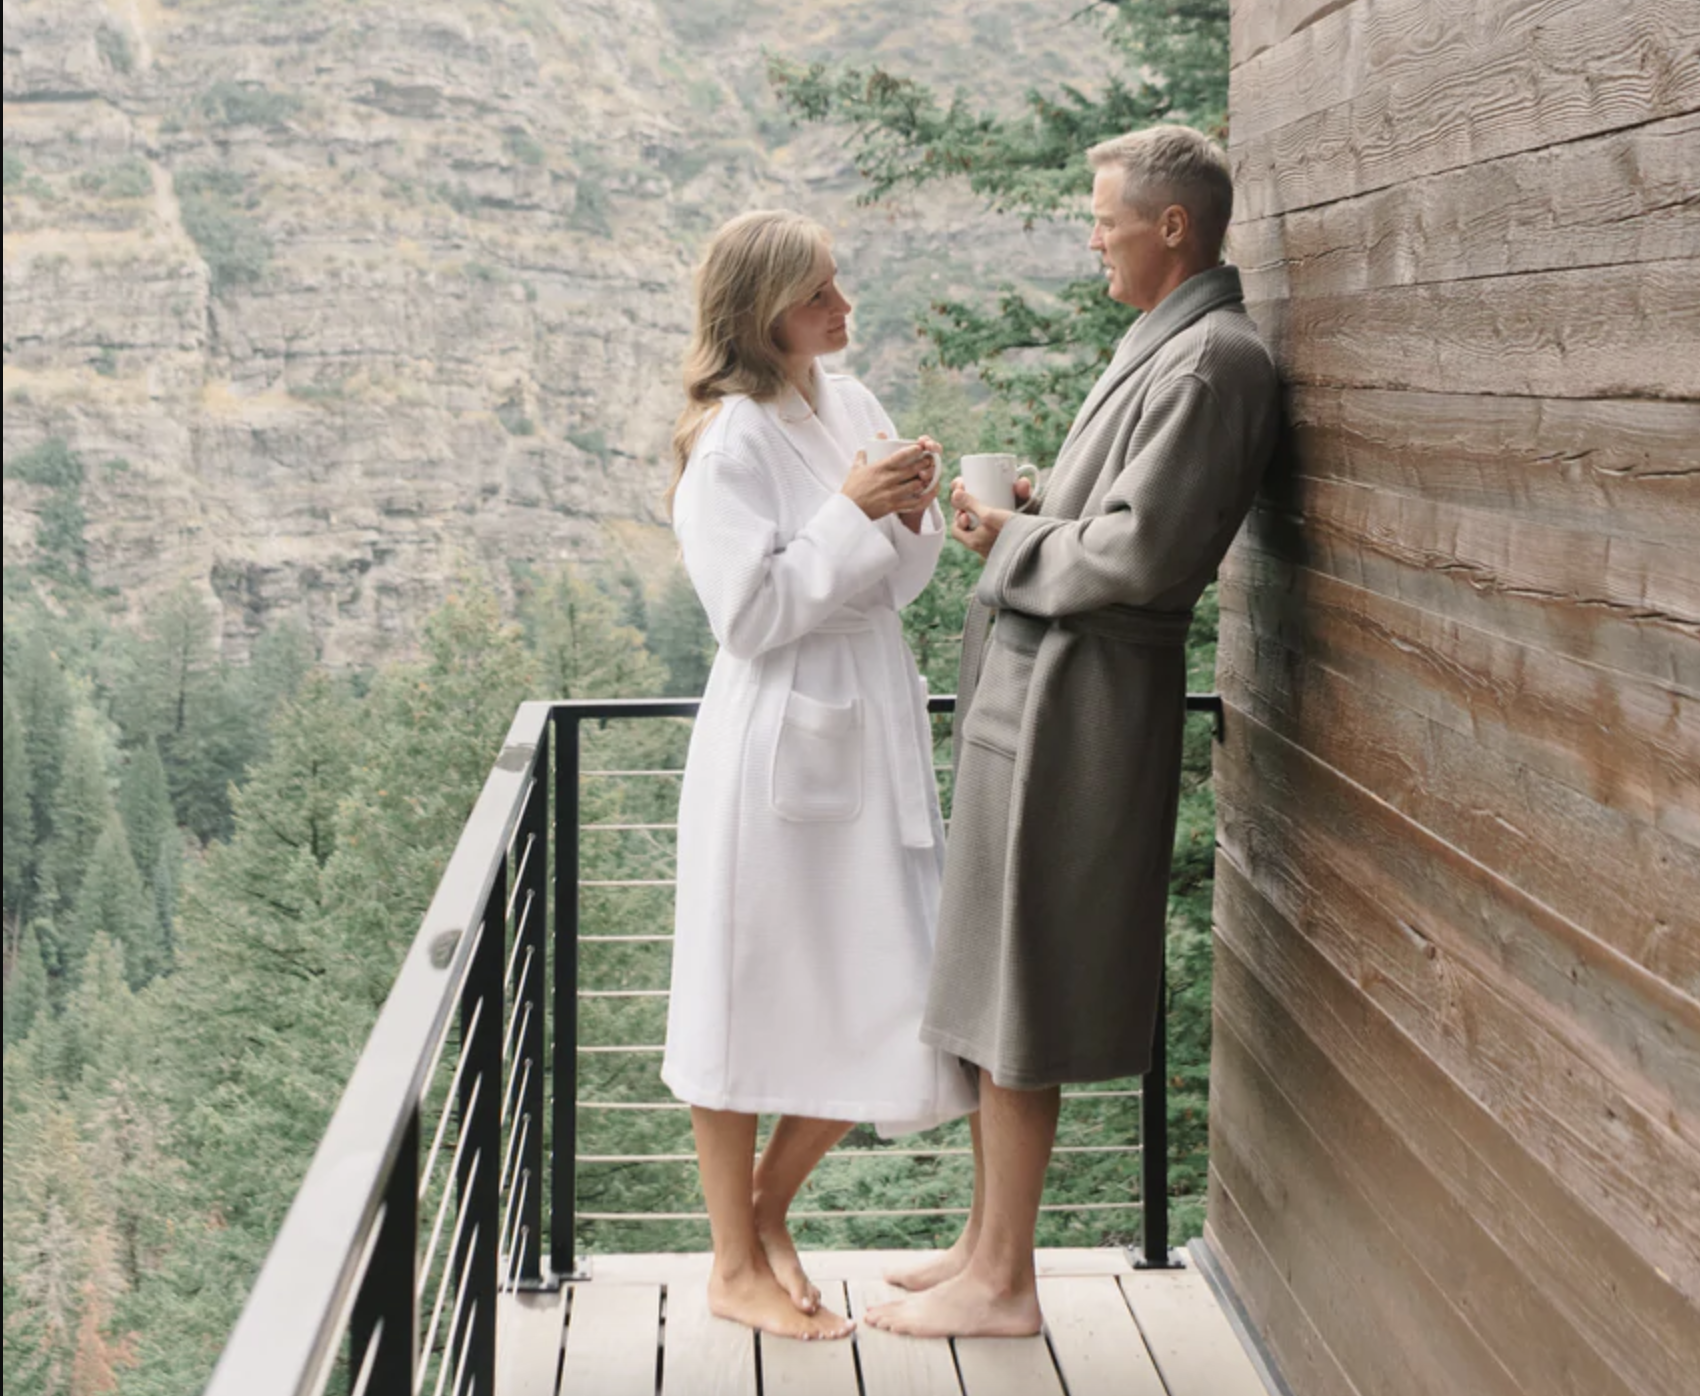 Two people wearing the robes stand outside on a balcony